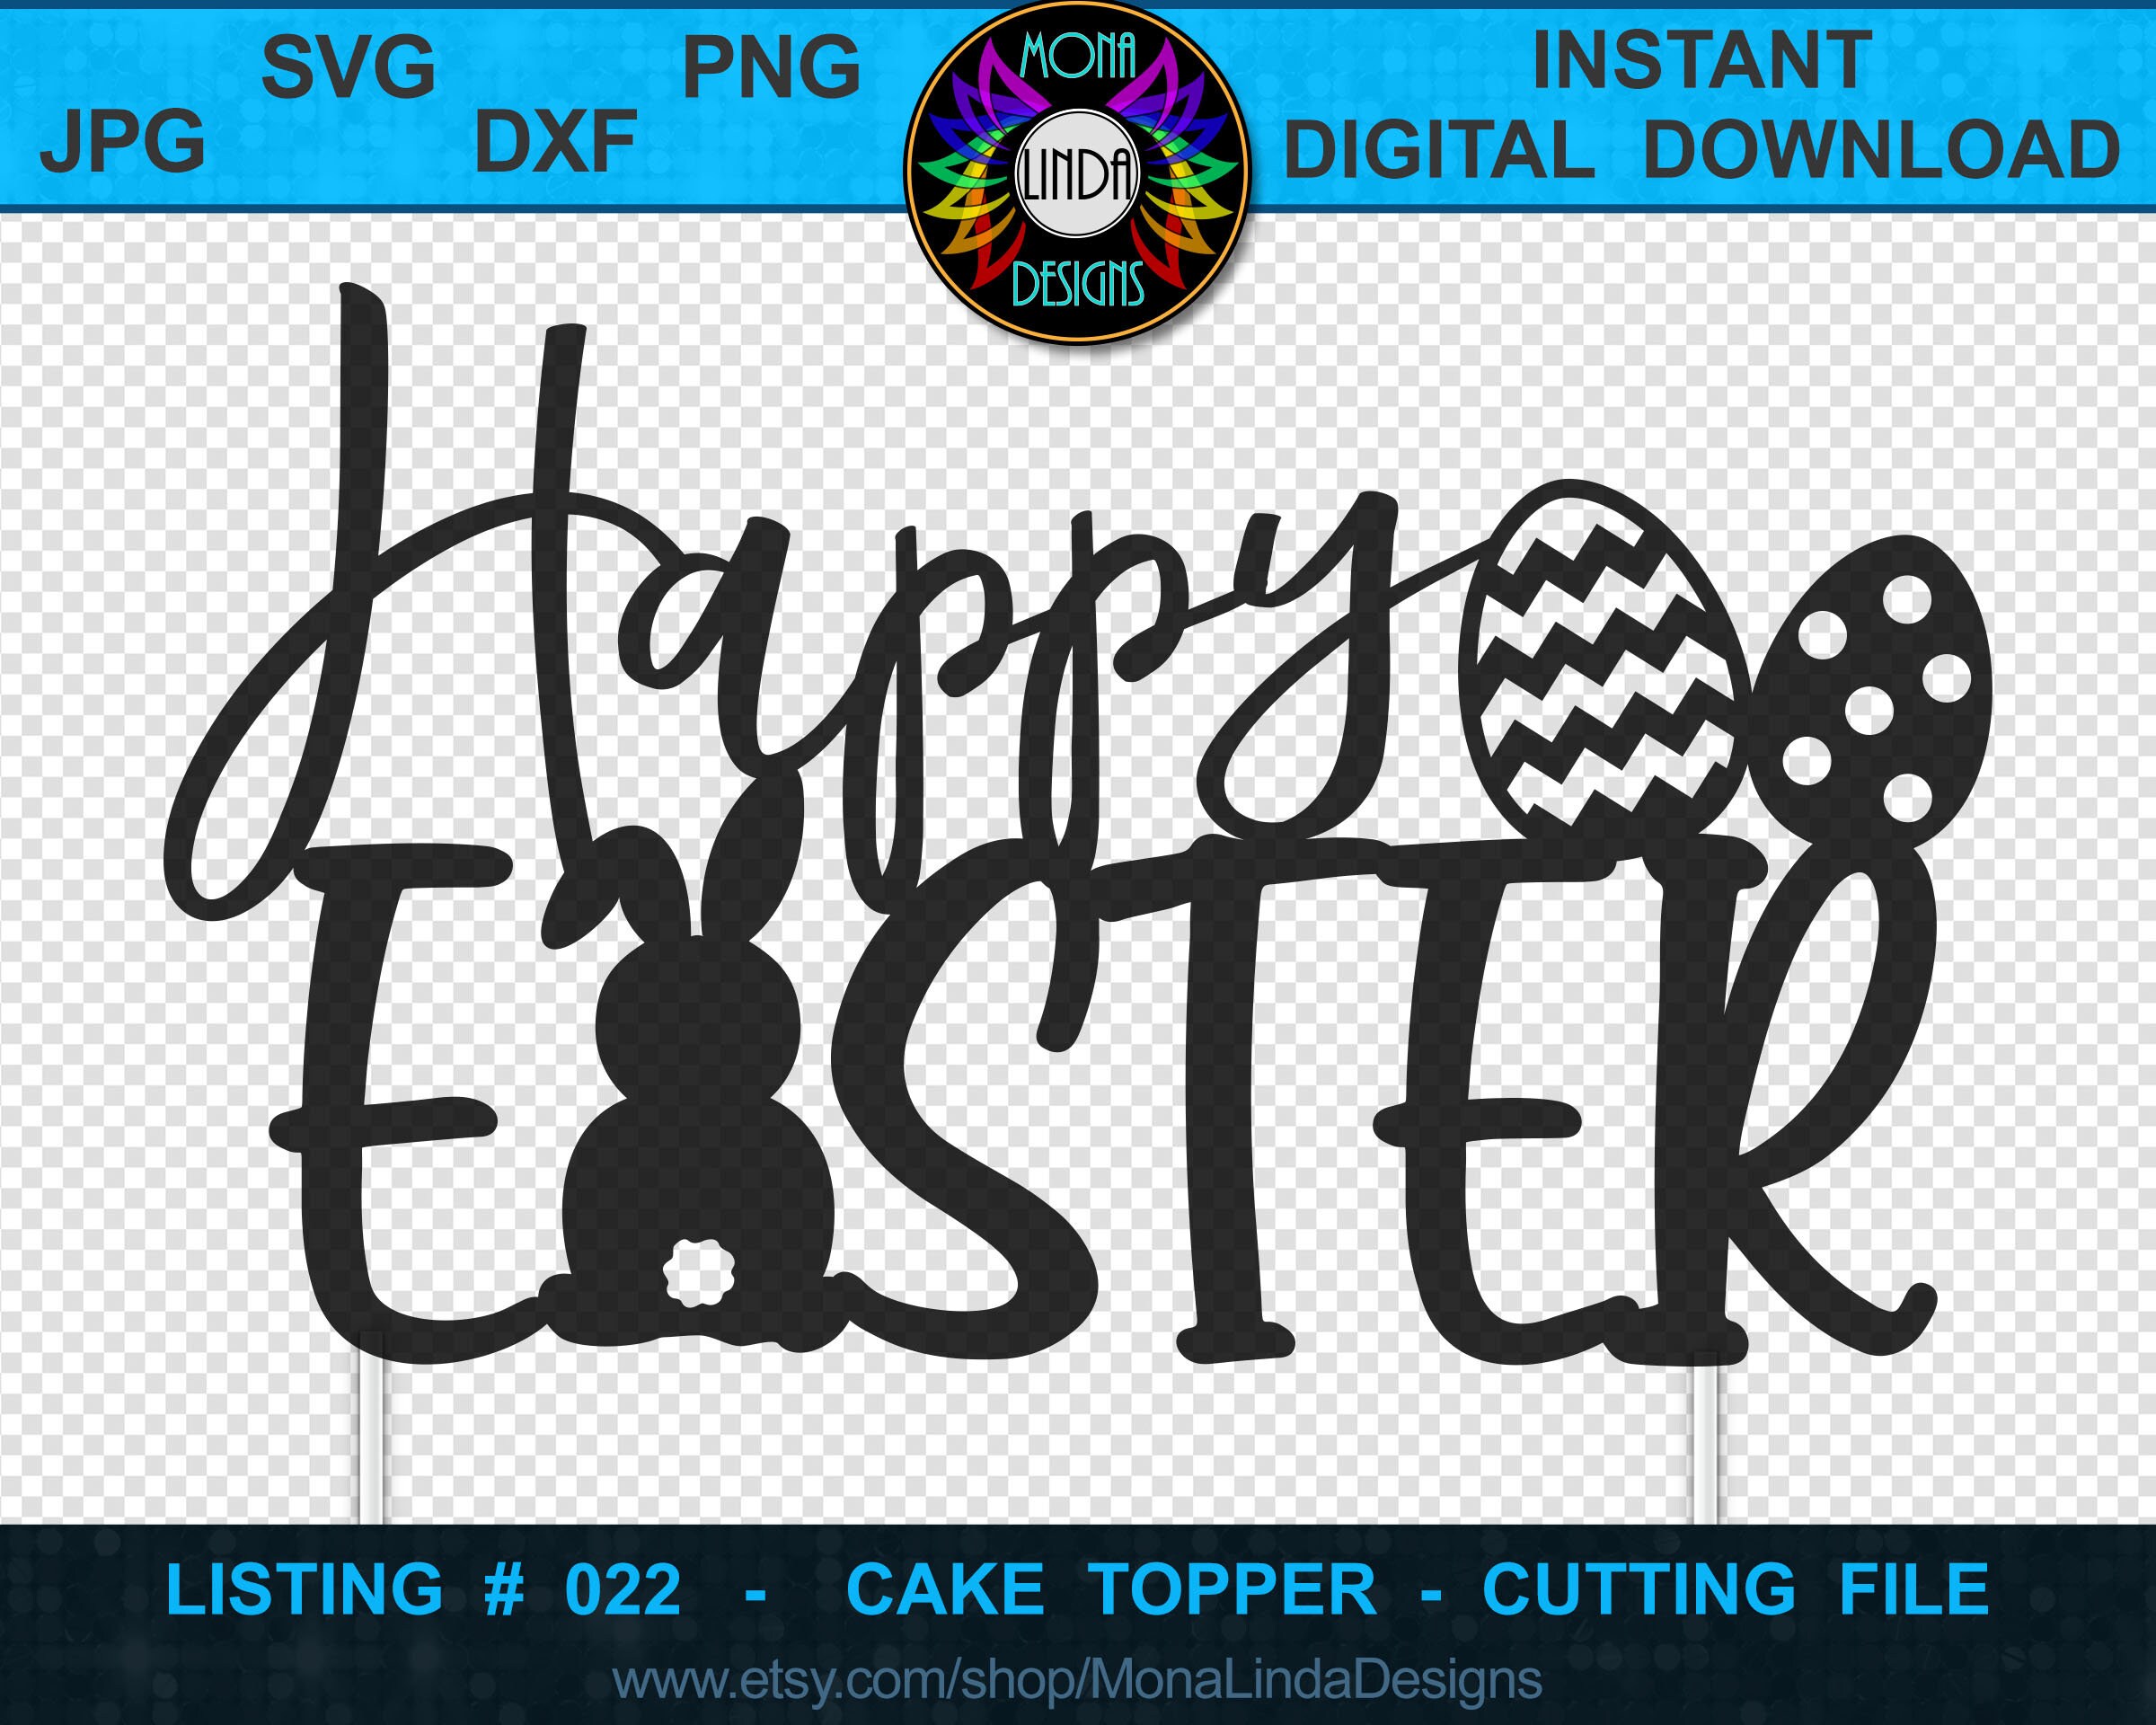 Cake Topper Happy Easter svg dxf jpg png files Bunny | Etsy